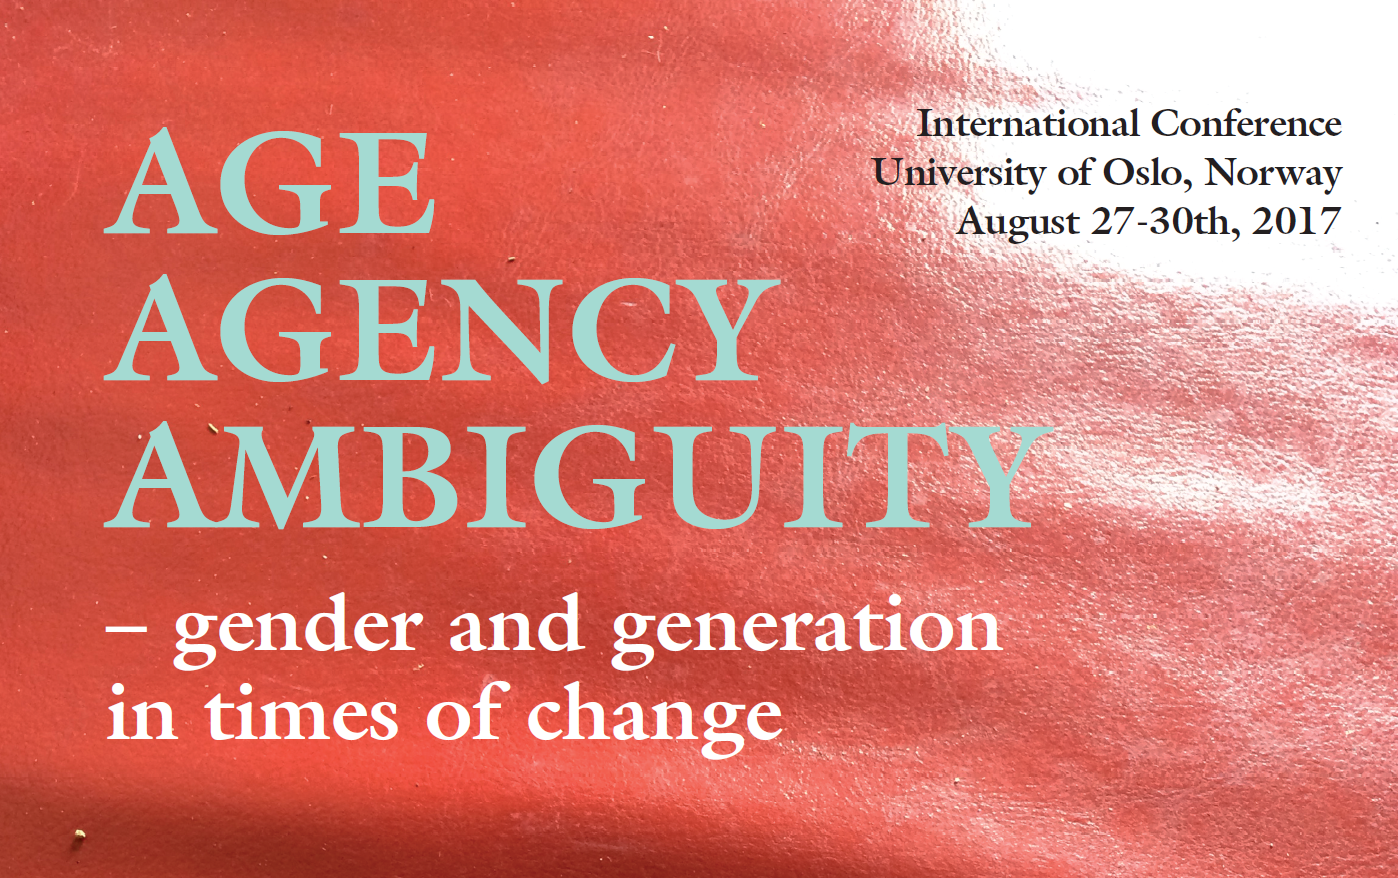 International Conference "Age Agency Ambiguity - gender and generation in times of change", University of Oslo, Aug. 27 - 30, 2017.